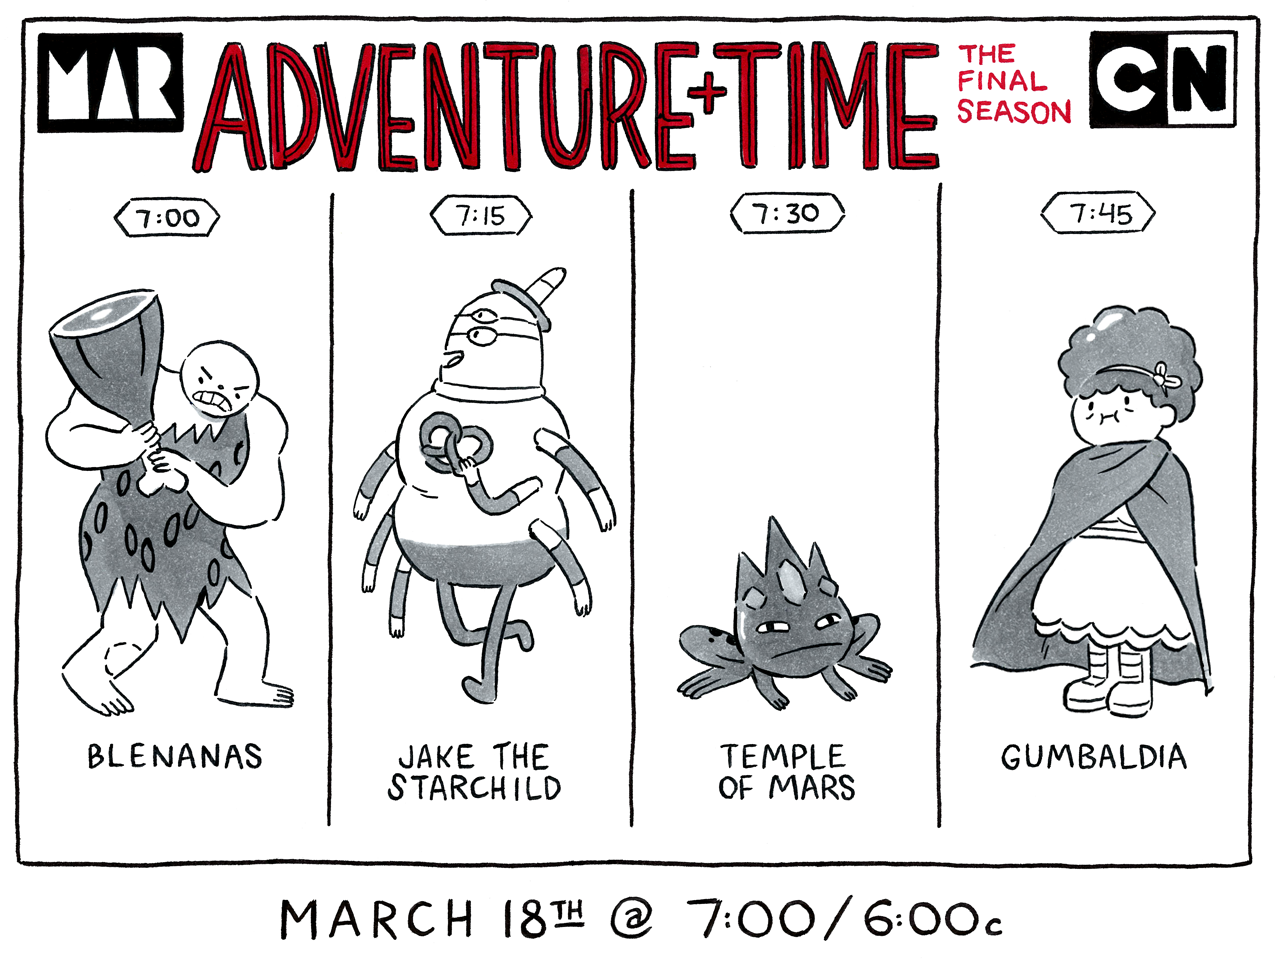 ADVENTURE TIME returns Sunday, March 18th!FOUR NEW episodes premiering back-to-back